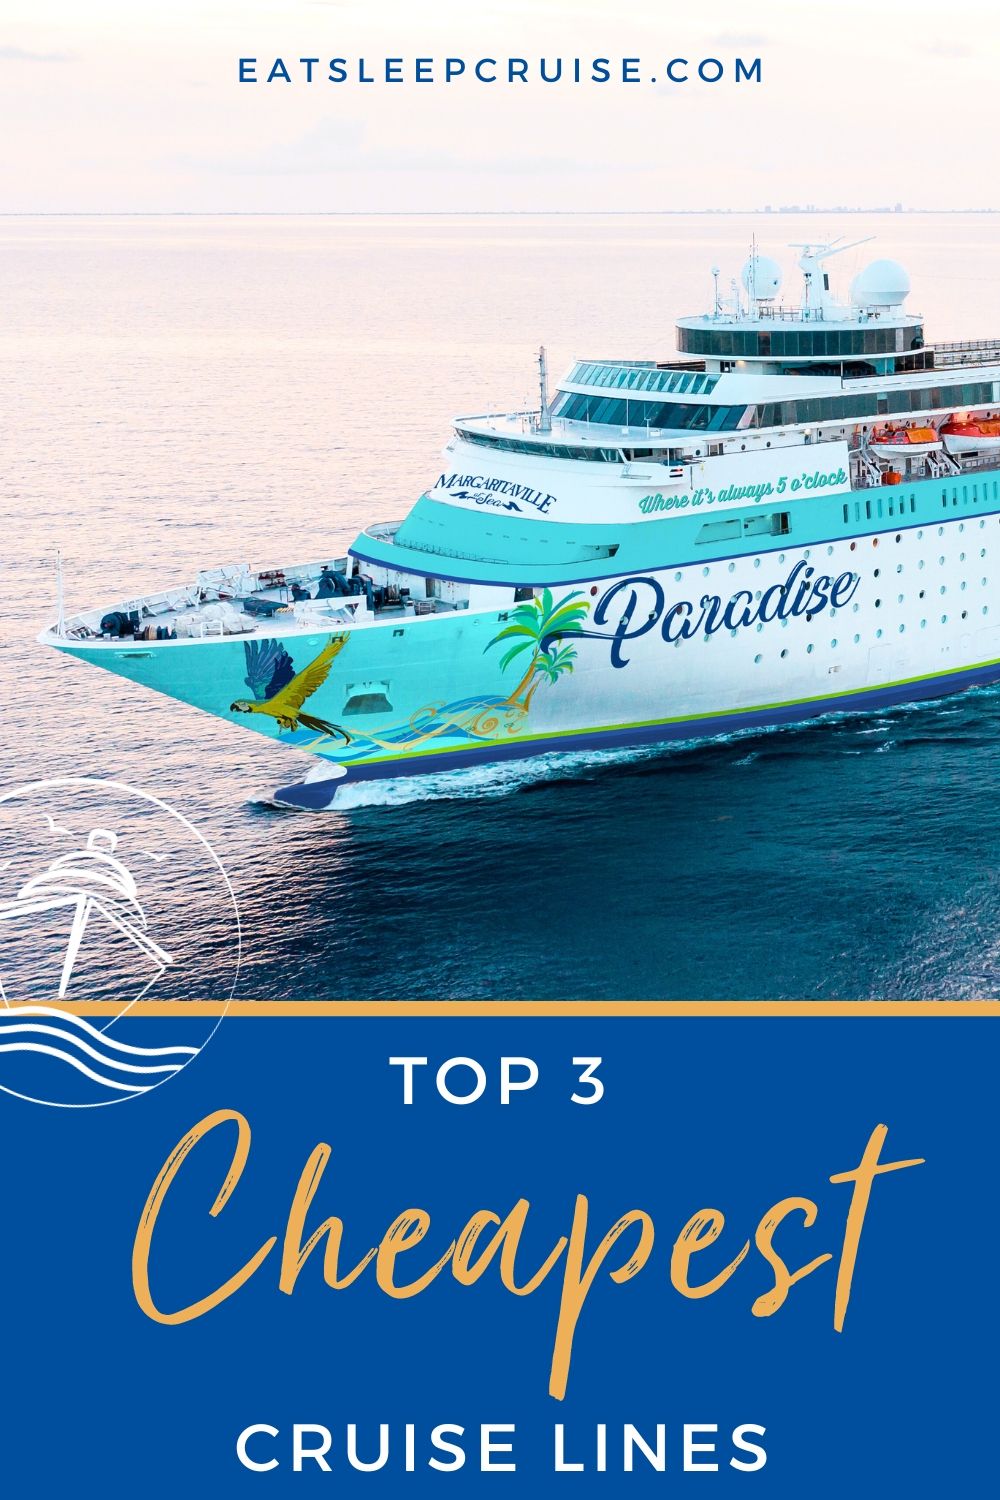 What is the Cheapest Cruise Line?